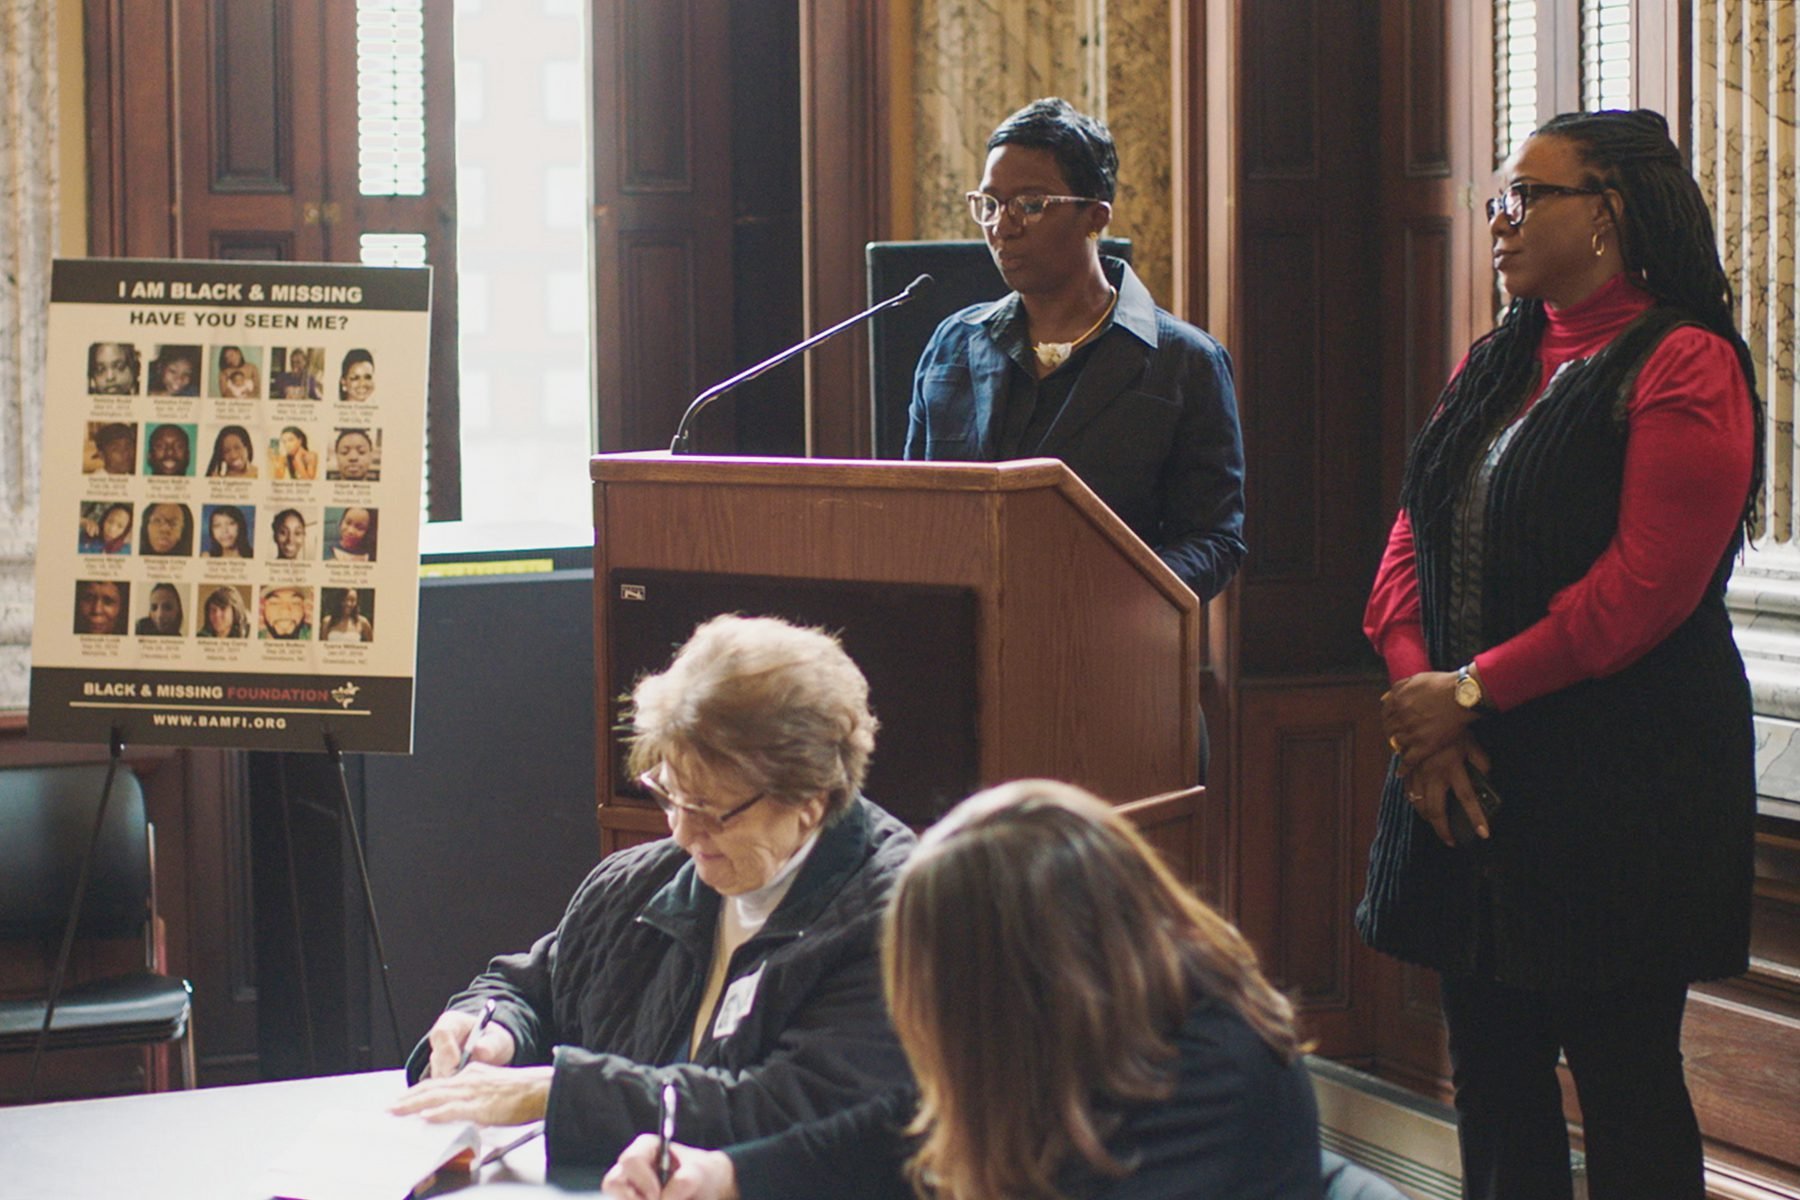 Natalie and Derrica Wilson, the co-founders of the Black and Missing Foundation make a presentation at Baltimore City Hall.